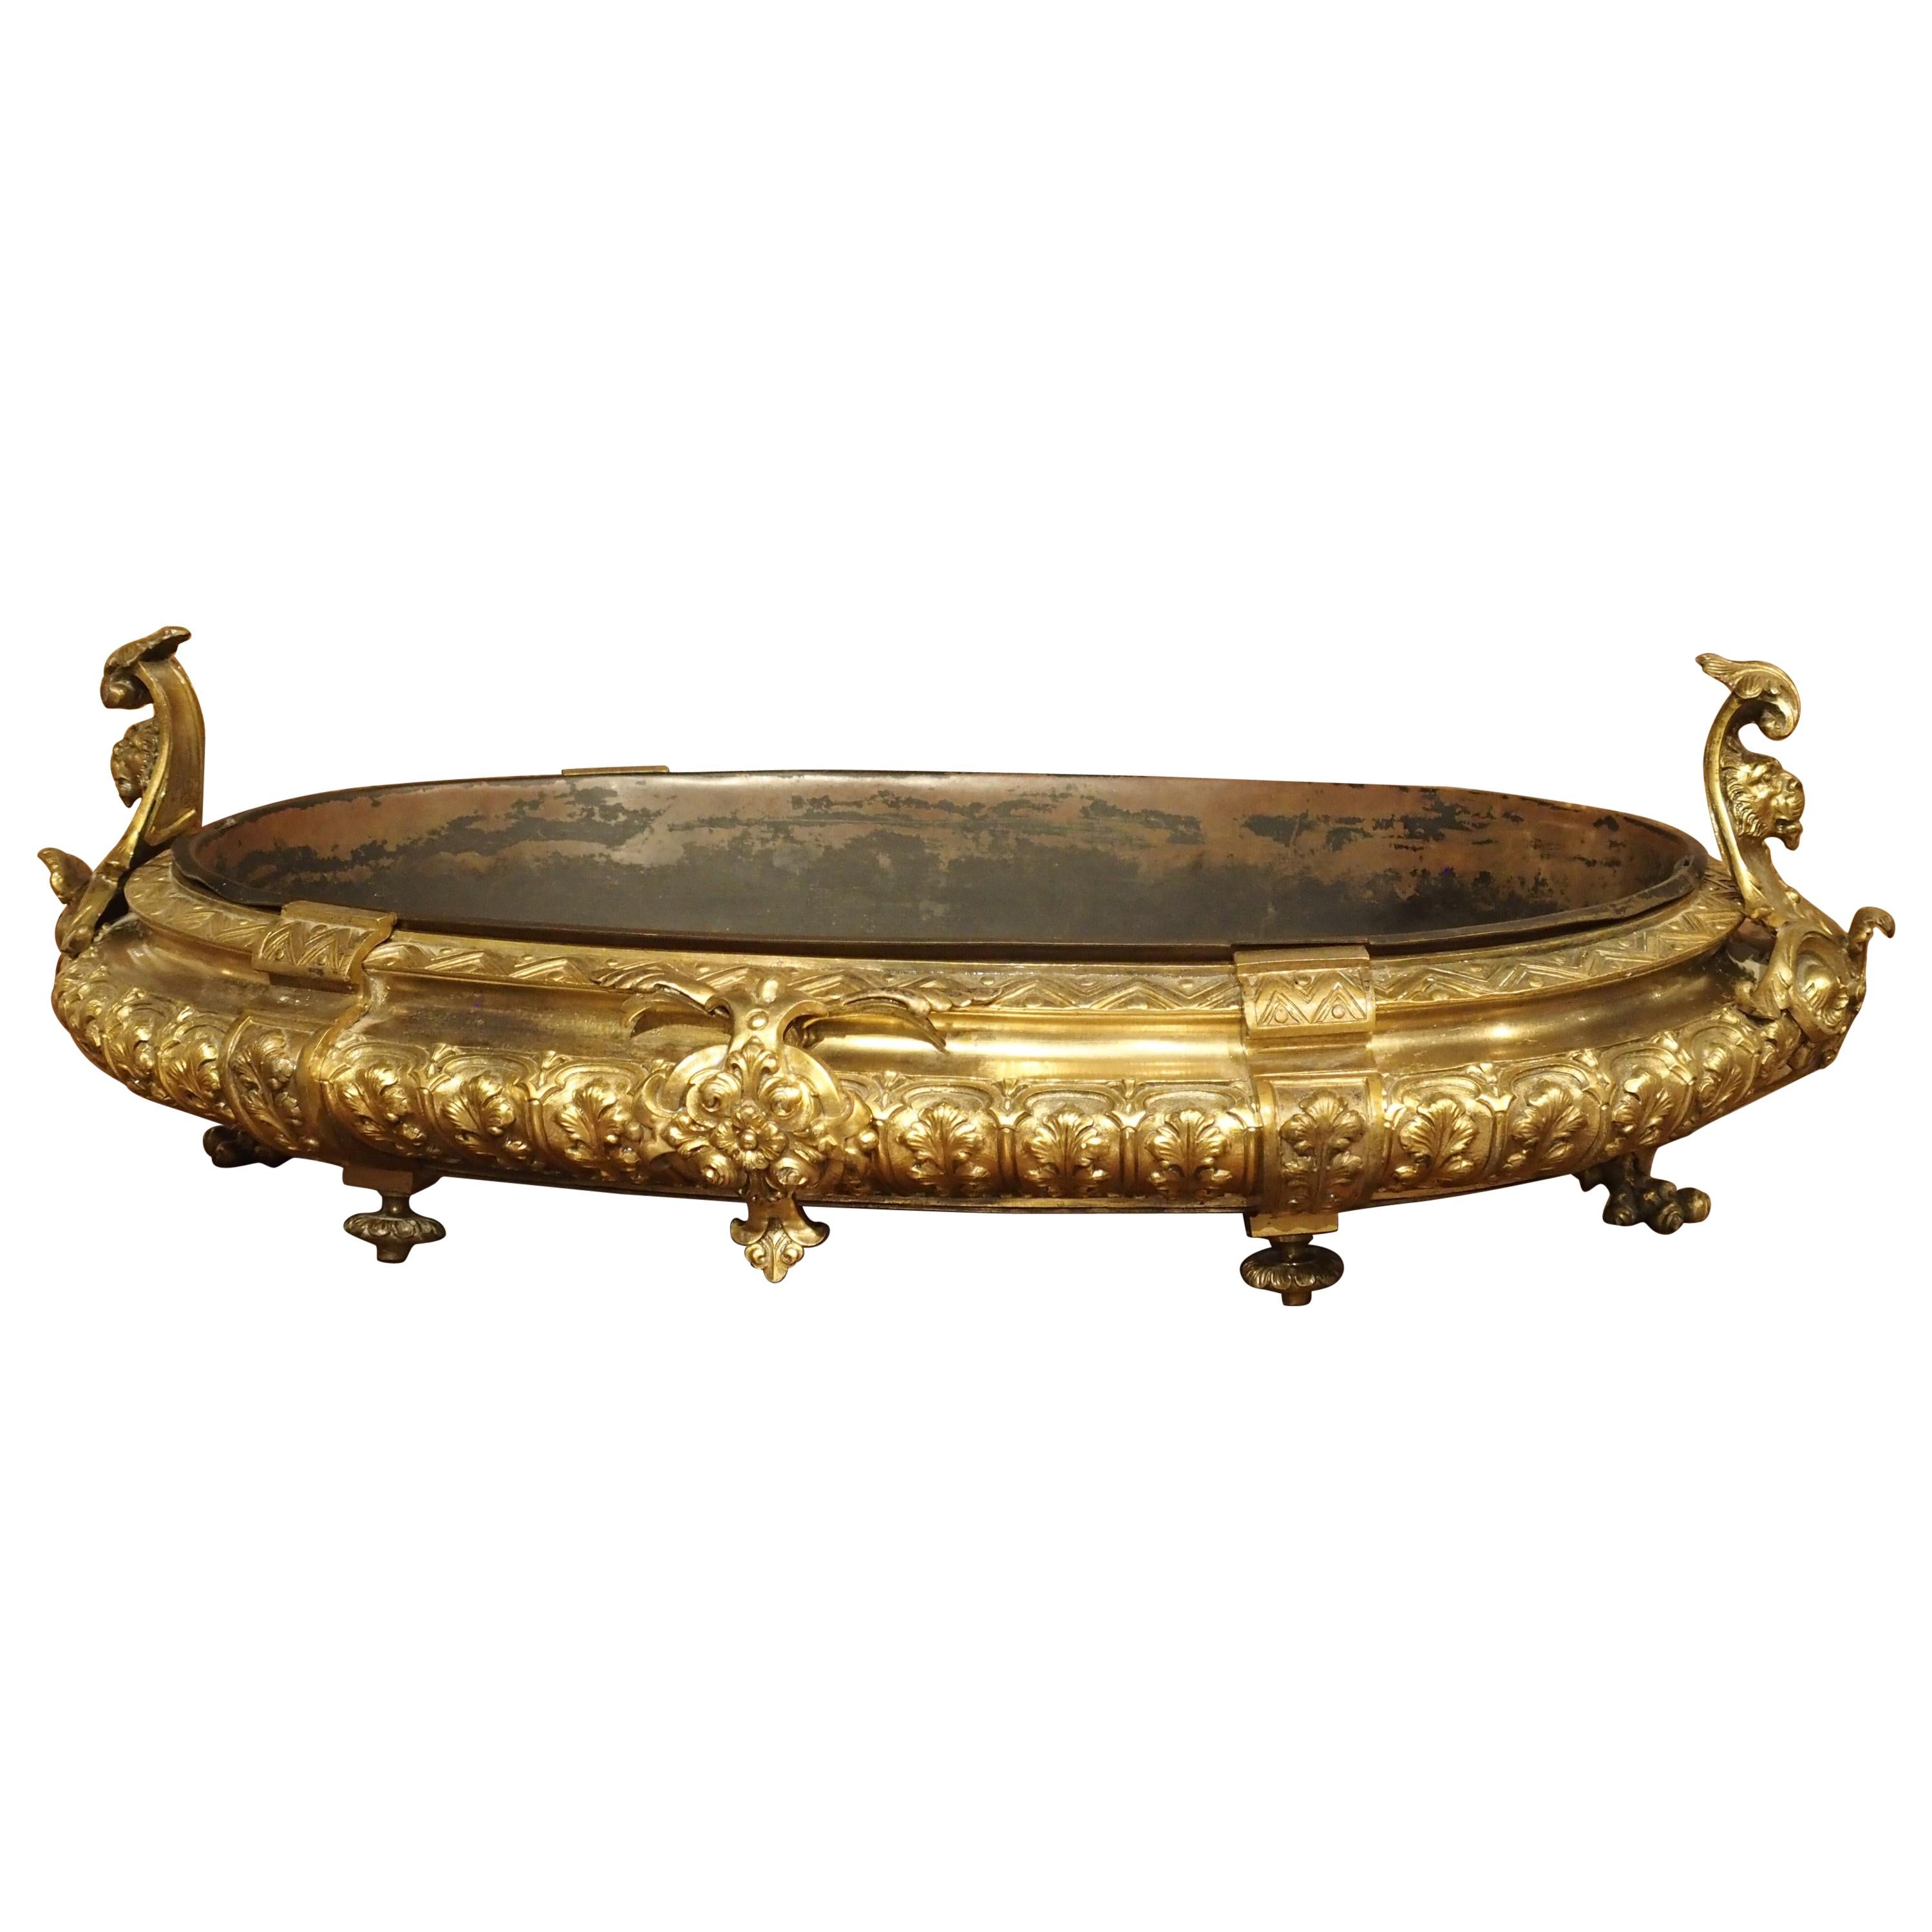 Elegant Neoclassical Gilt Bronze Jardiniere from France, Circa 1850 For Sale